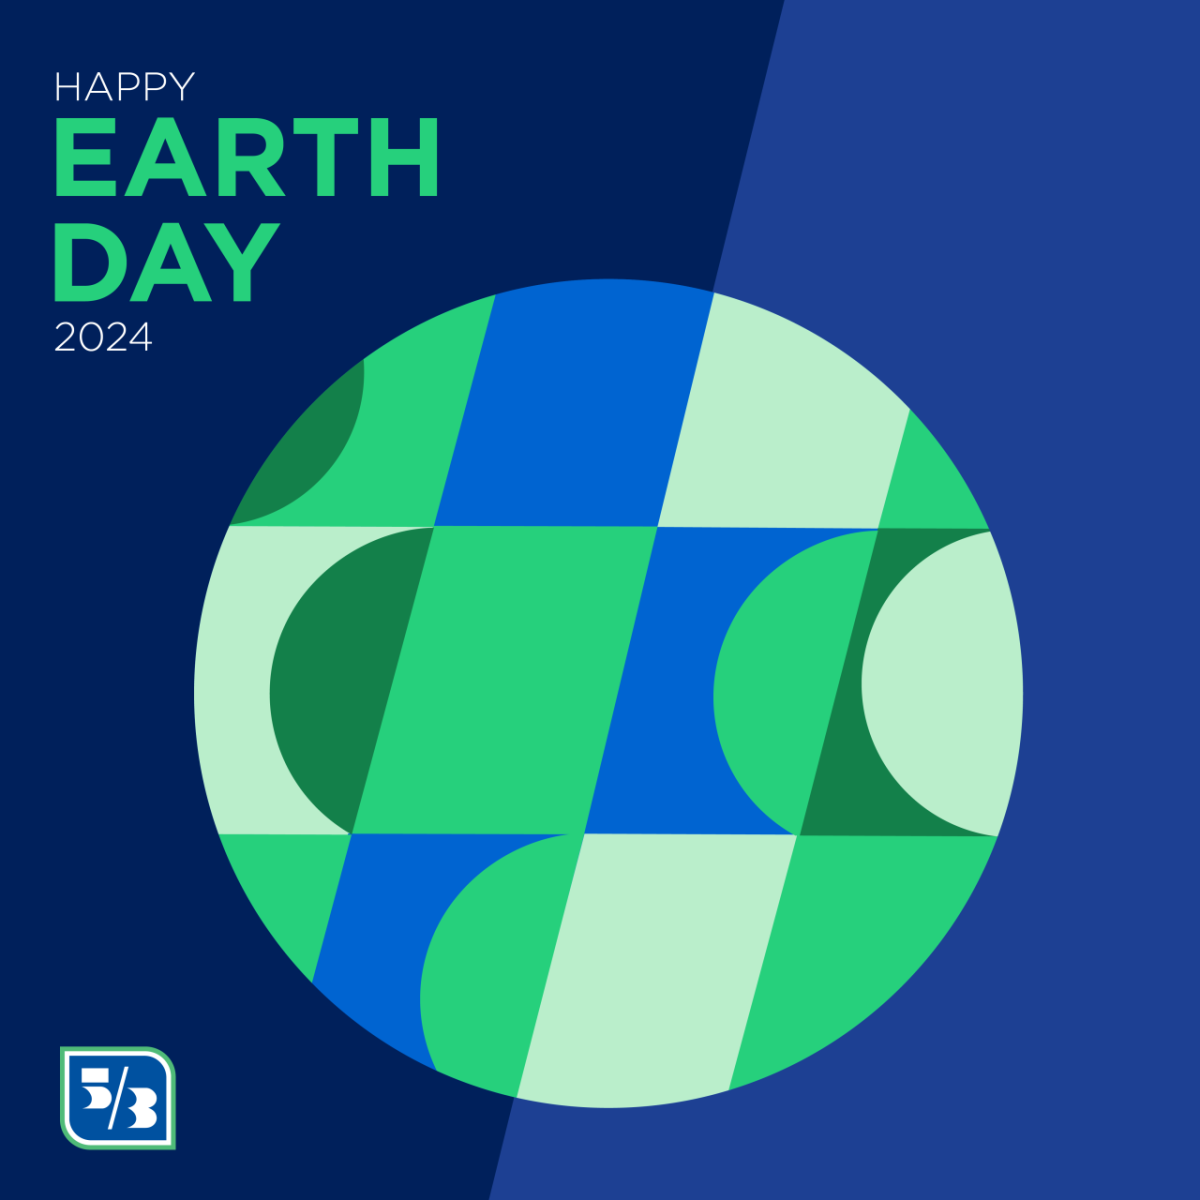 Earth Day, with modern green and blue circle